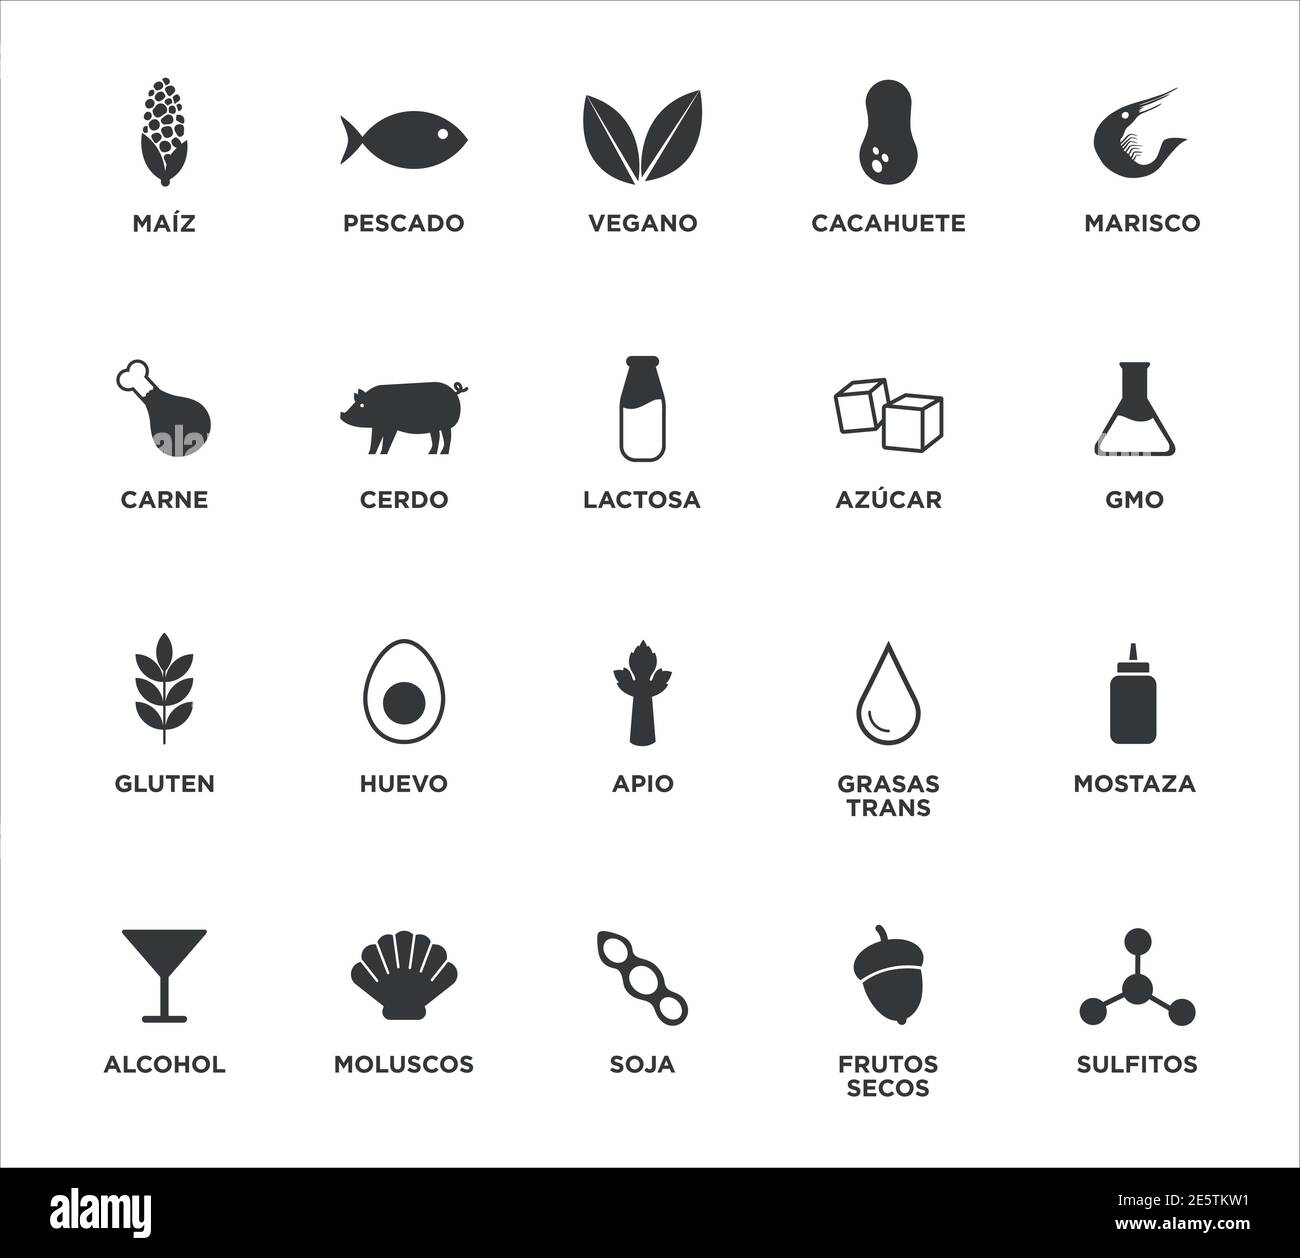 Allergen food icons set written in Spanish. Black and white. Vector illustration for restaurant menus and food products. Stock Vector